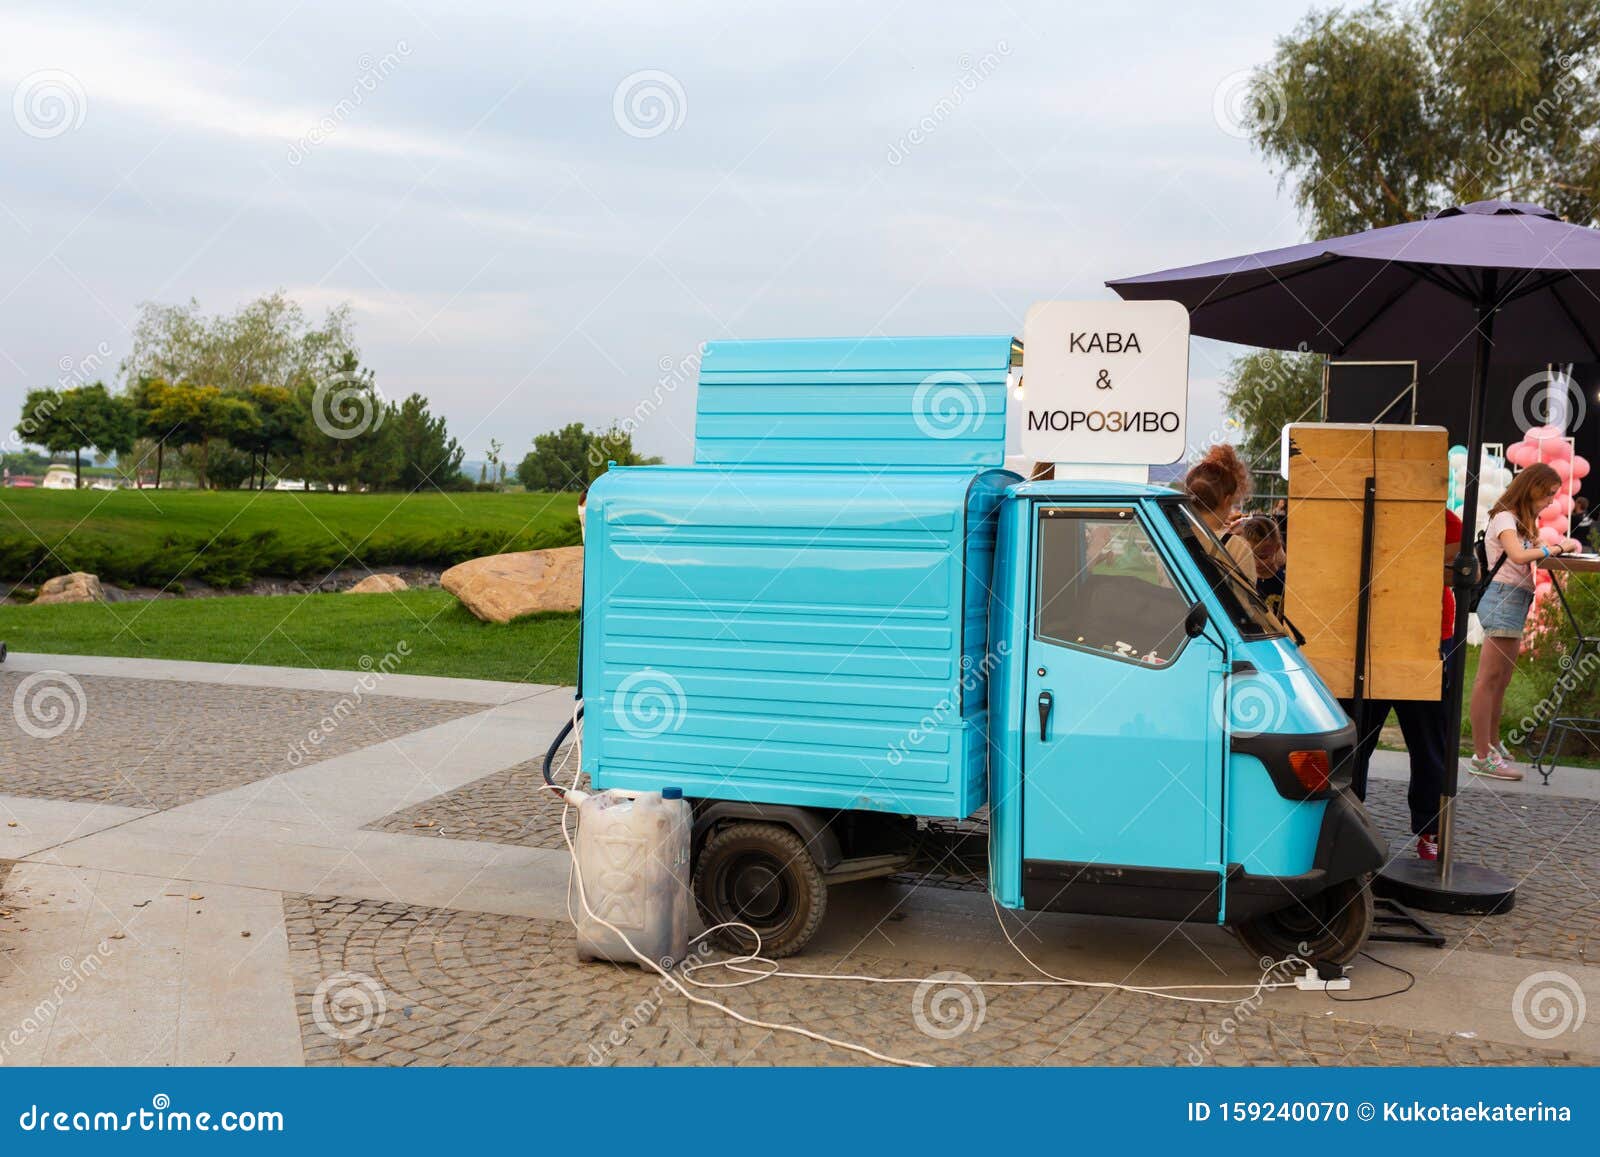 https://thumbs.dreamstime.com/z/small-car-which-sell-coffee-coffee-machine-installed-car-street-mobile-coffee-shop-small-car-159240070.jpg